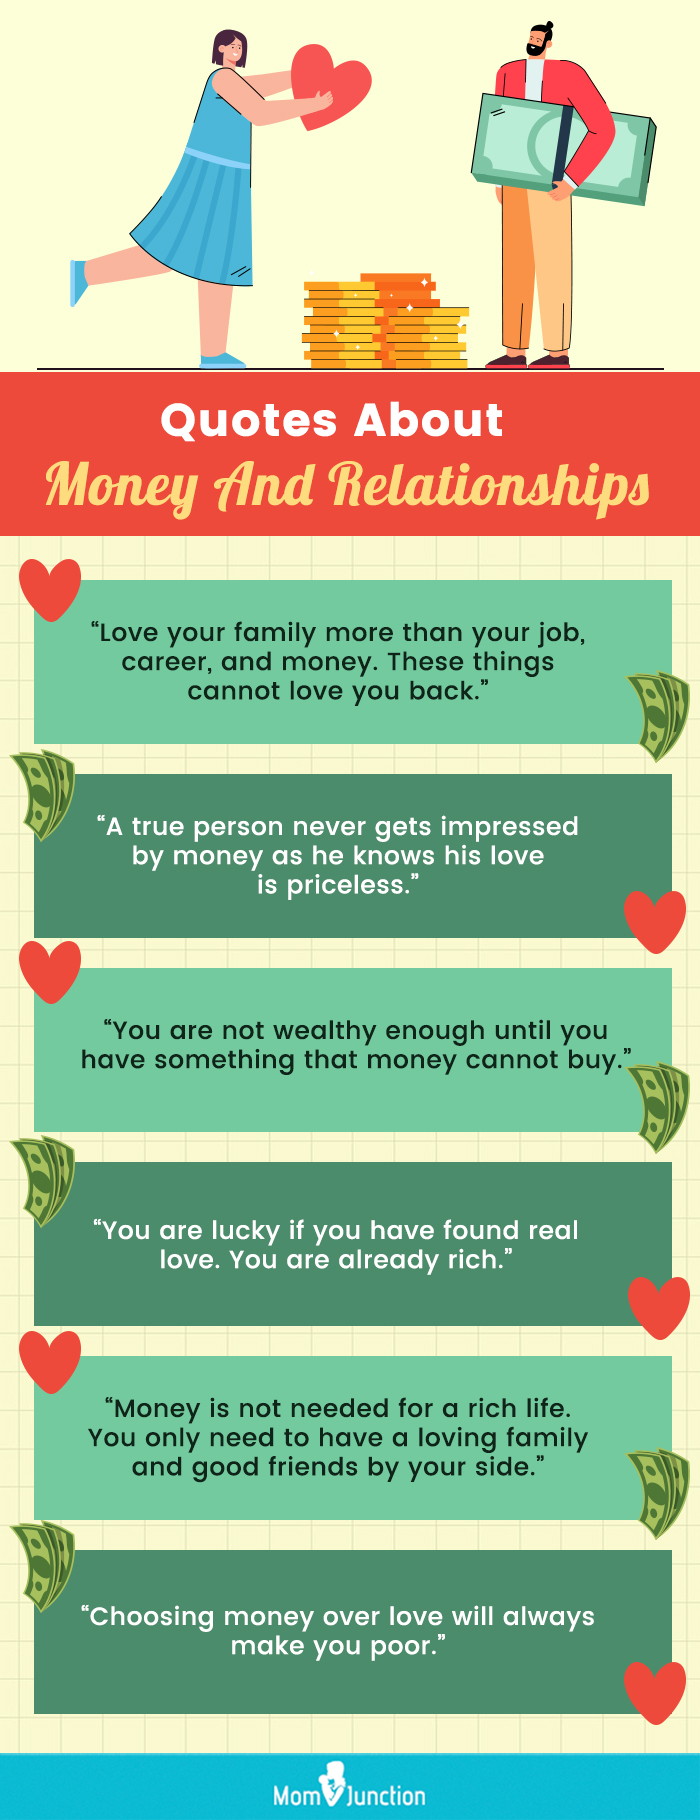 poor people vs rich people quotes